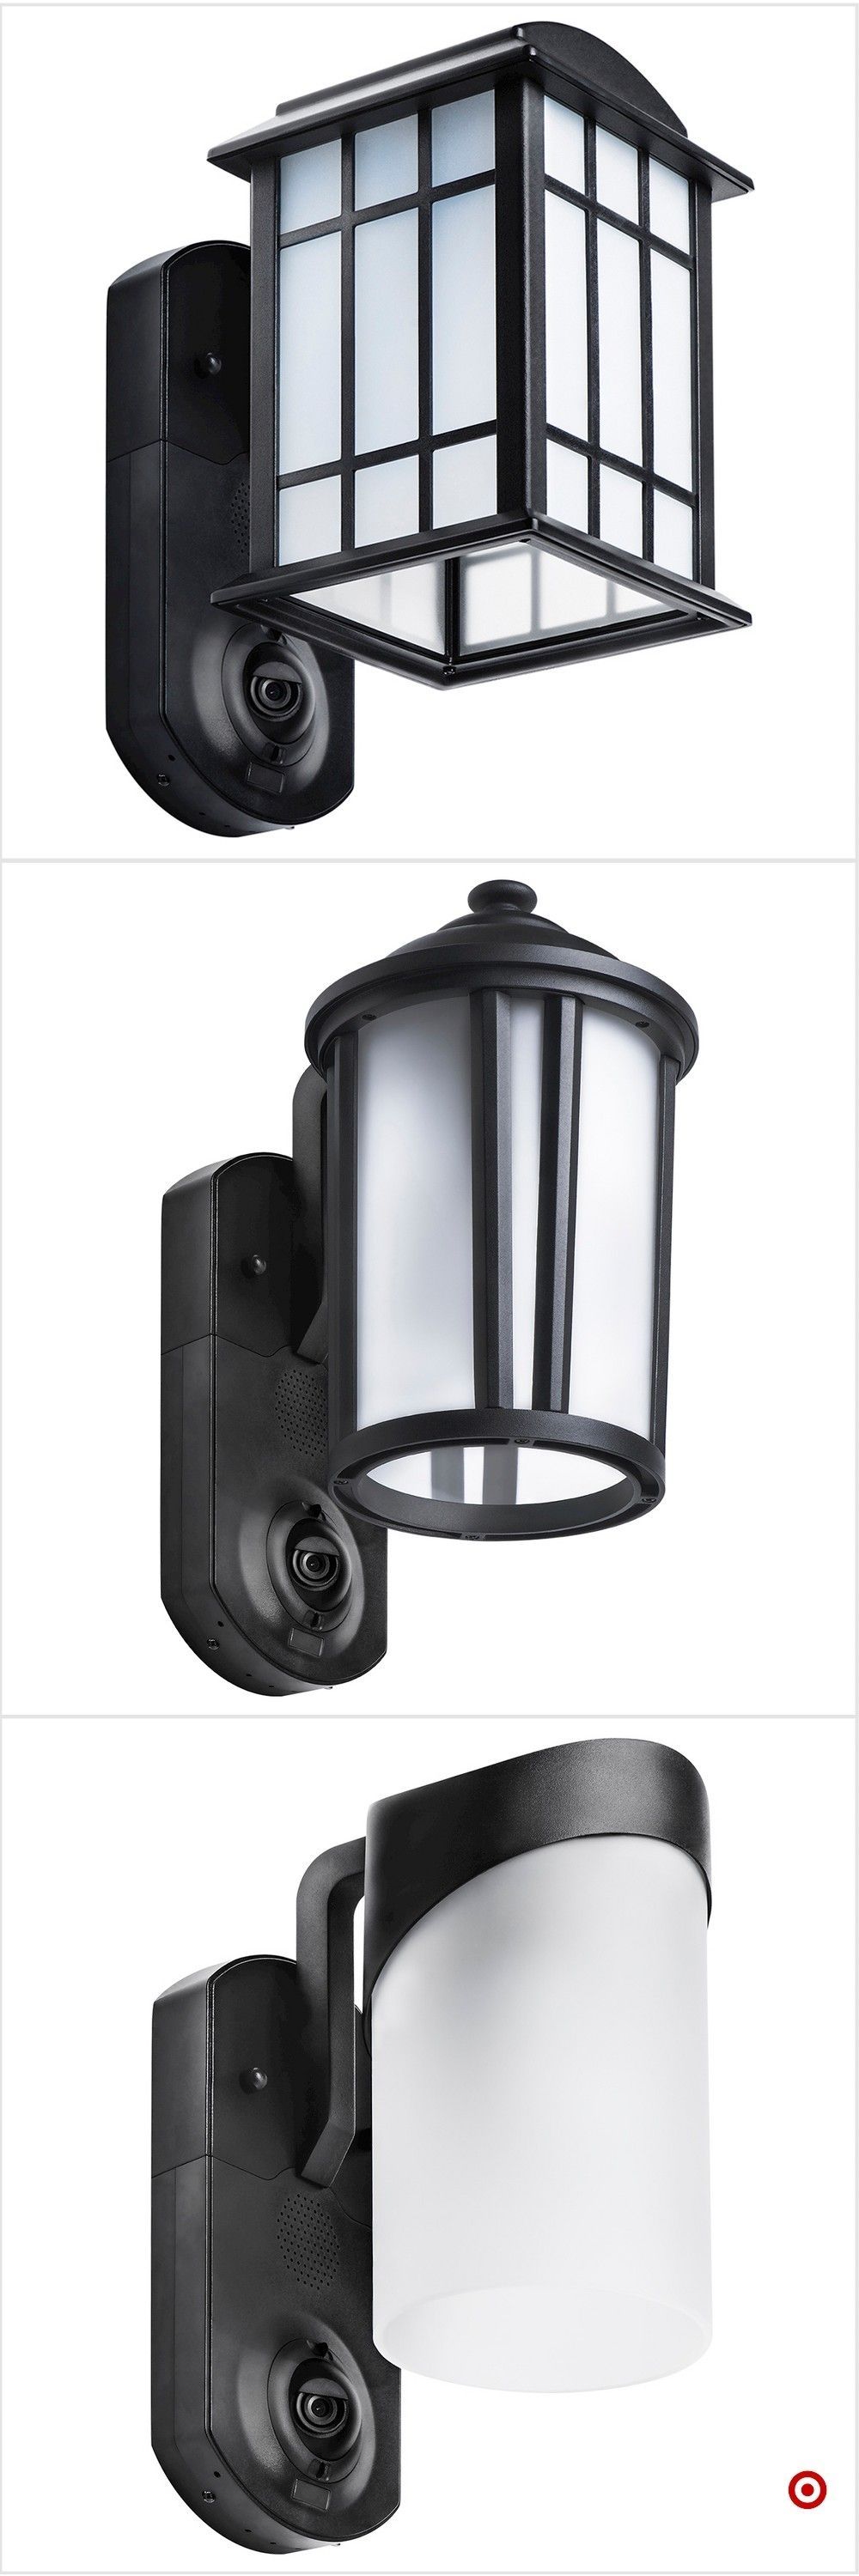 Shop Target For Outdoor Wall Lights You Will Love At Great Low With Target Outdoor Wall Lighting (Photo 6 of 15)